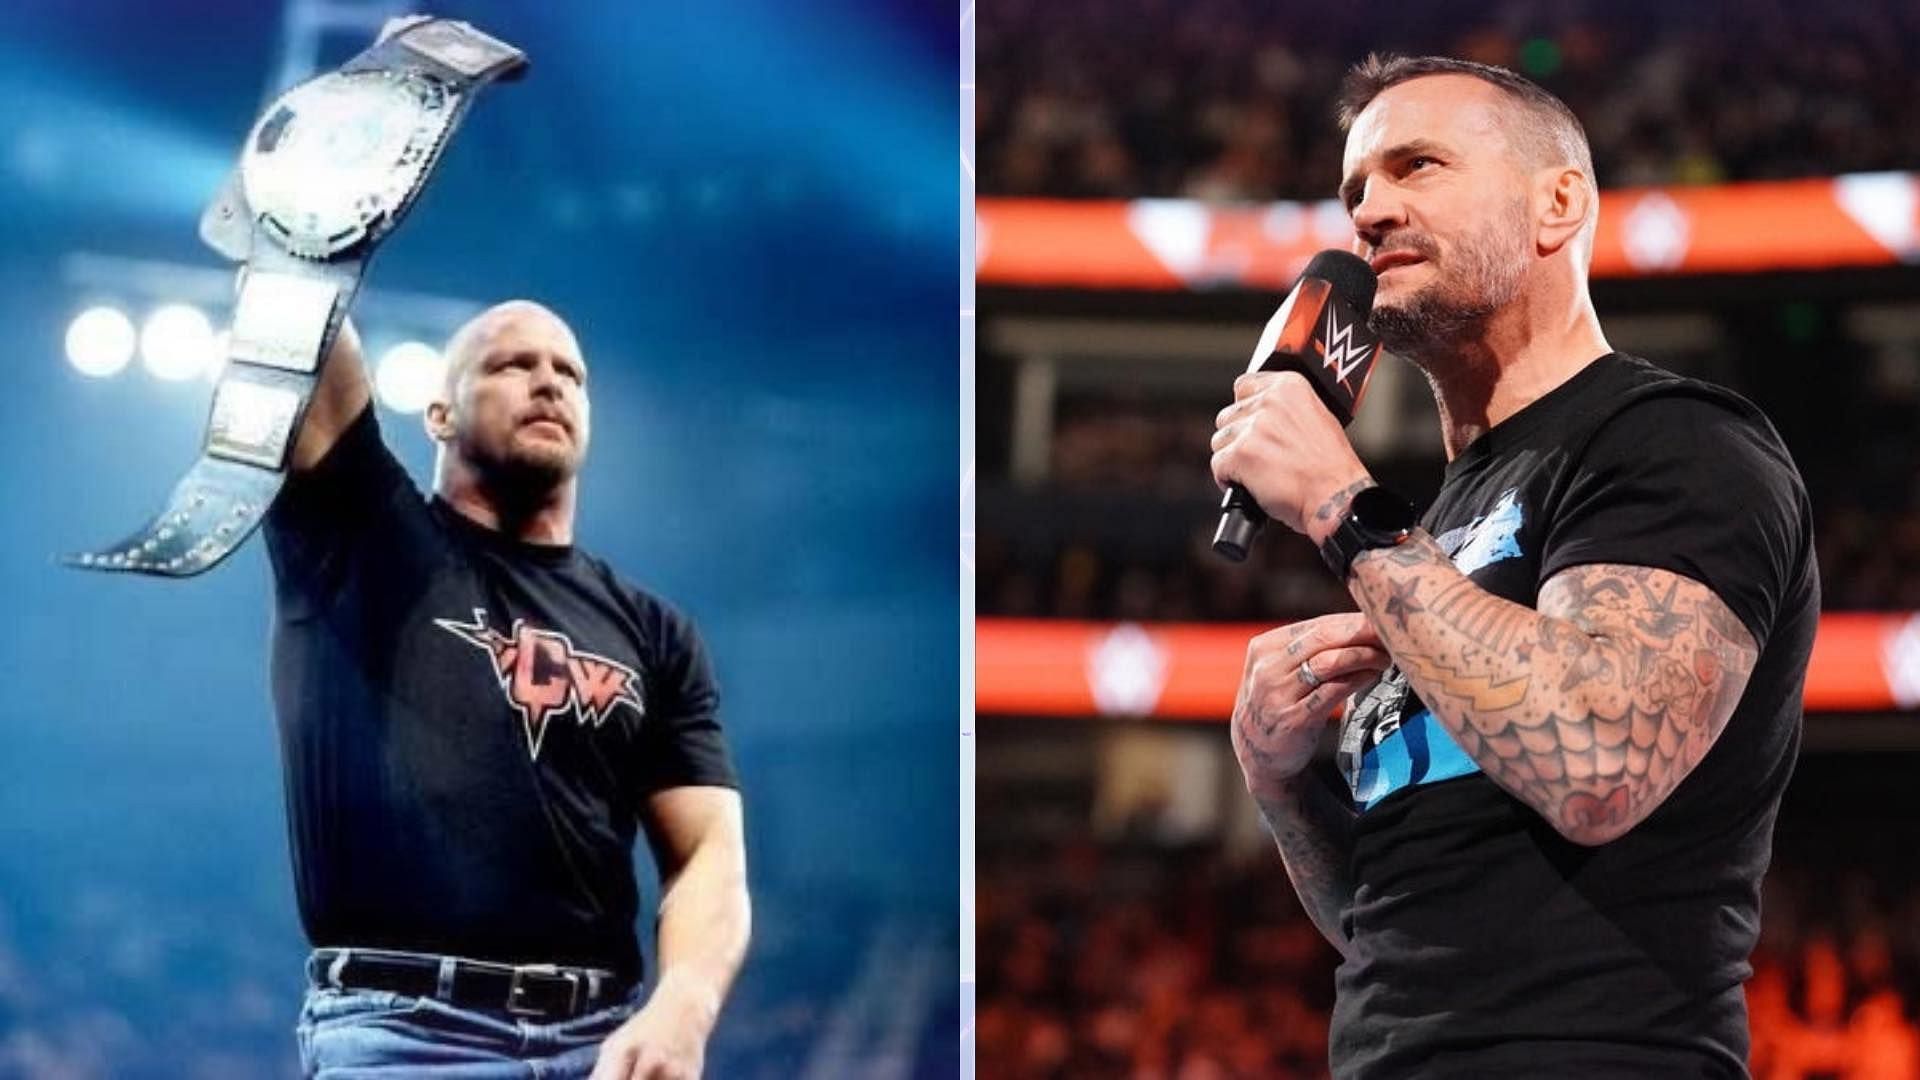 There have been talks of a potential match between CM Punk and Stone Cold Steve Austin.